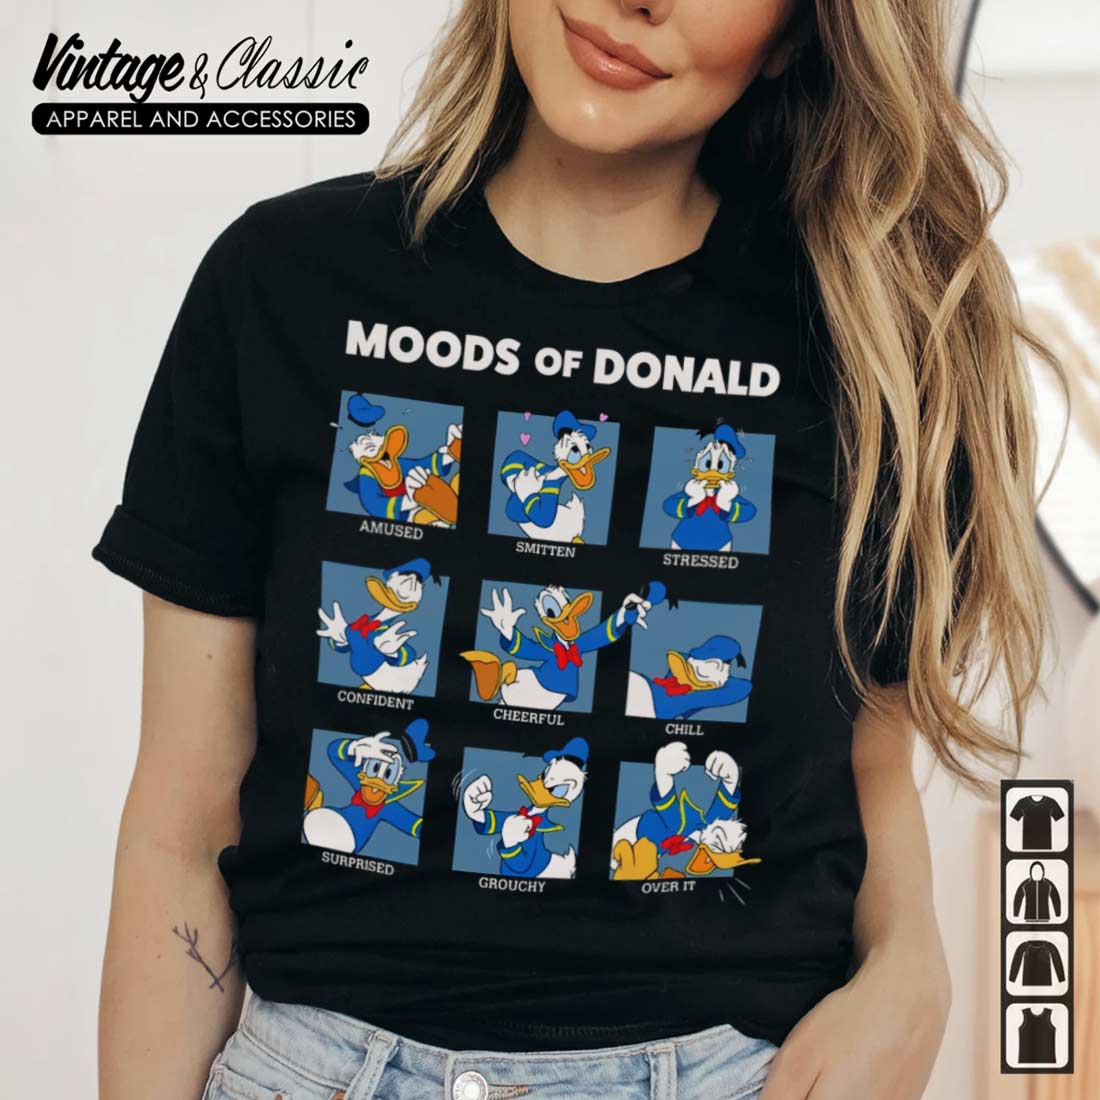 Moods Of Donald Duck, - Vintagenclassic Face Tee Funny Shirt Donald